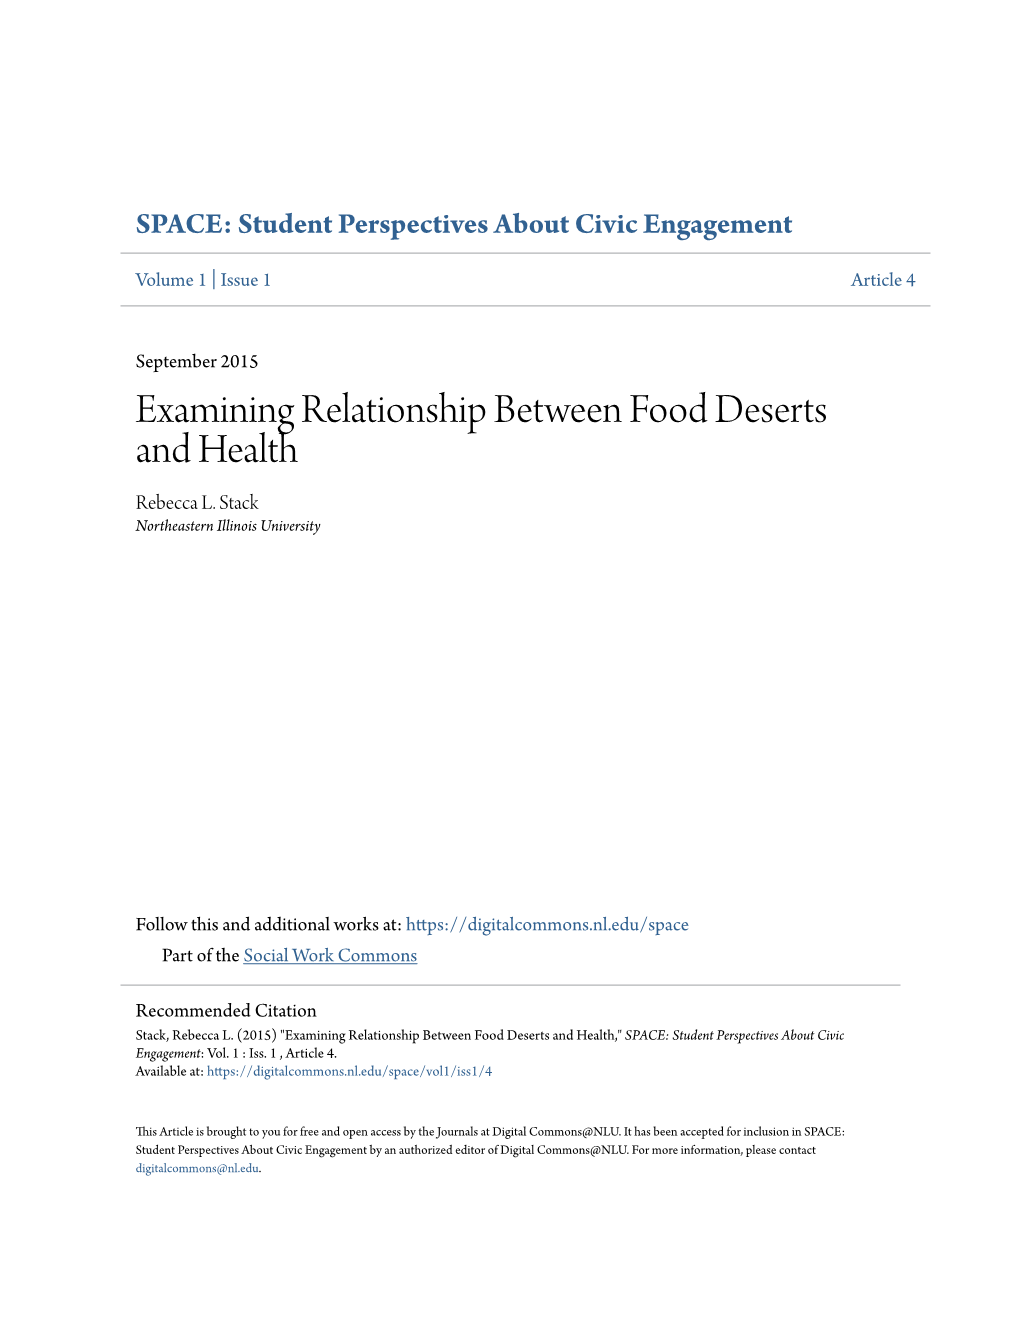 Examining Relationship Between Food Deserts and Health Rebecca L